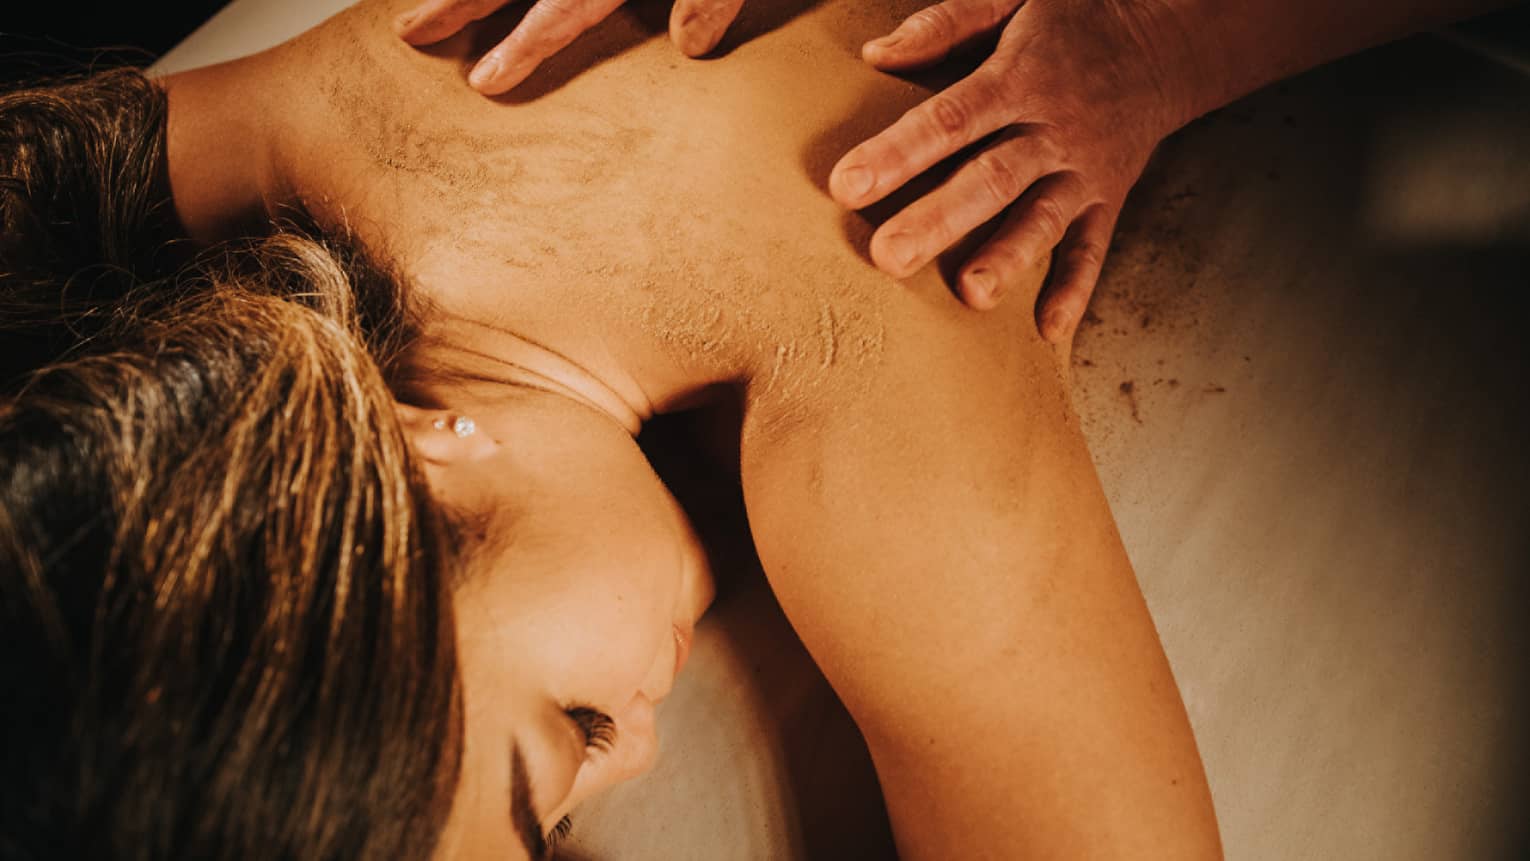 Two hands on woman's bare back as she lays on massage table in dimly lit room